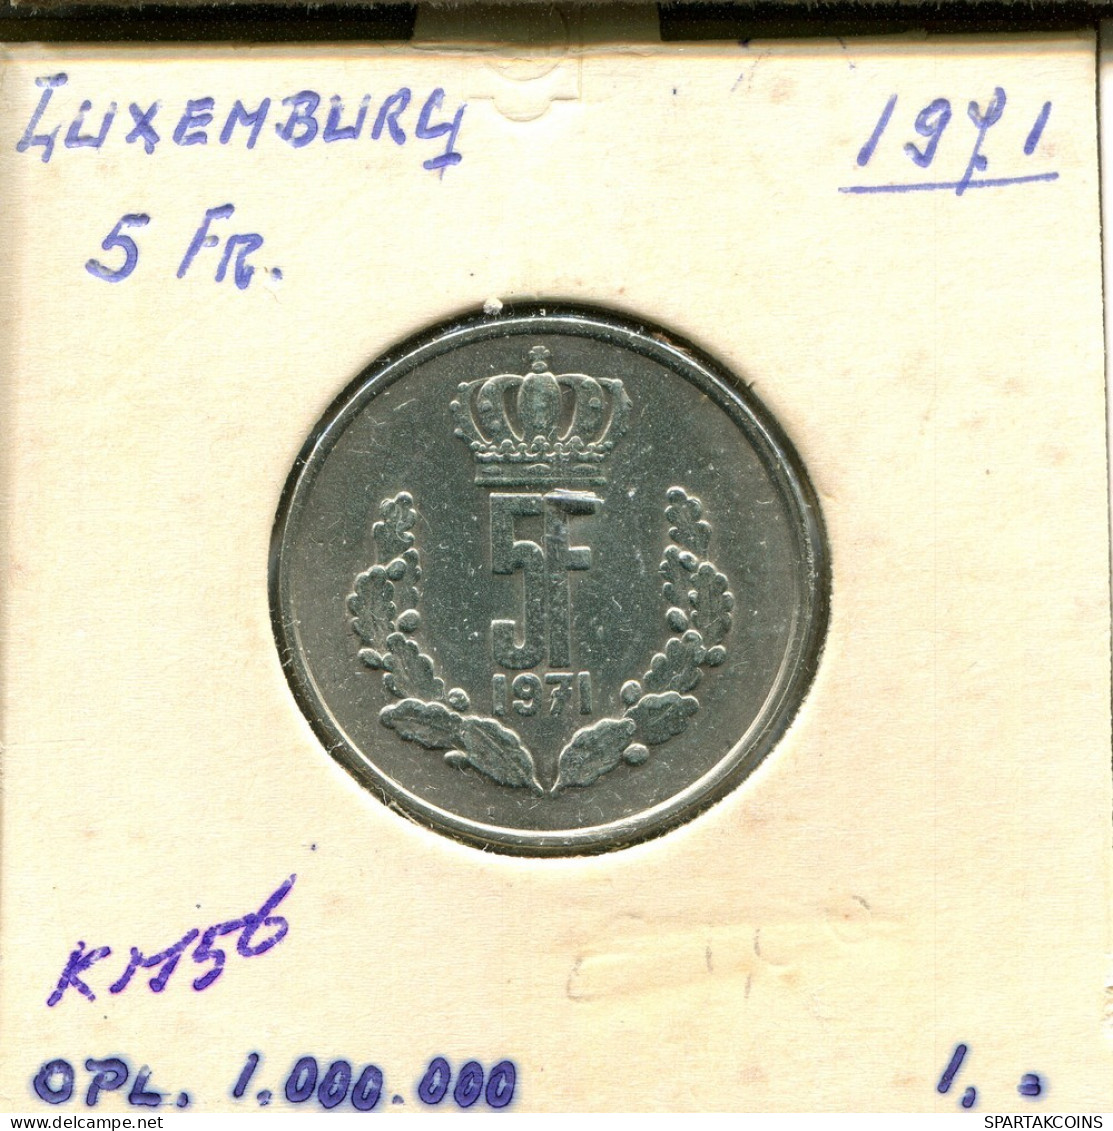 5 FRANCS 1971 LUXEMBURGO LUXEMBOURG Moneda #AT229.E.A - Luxembourg